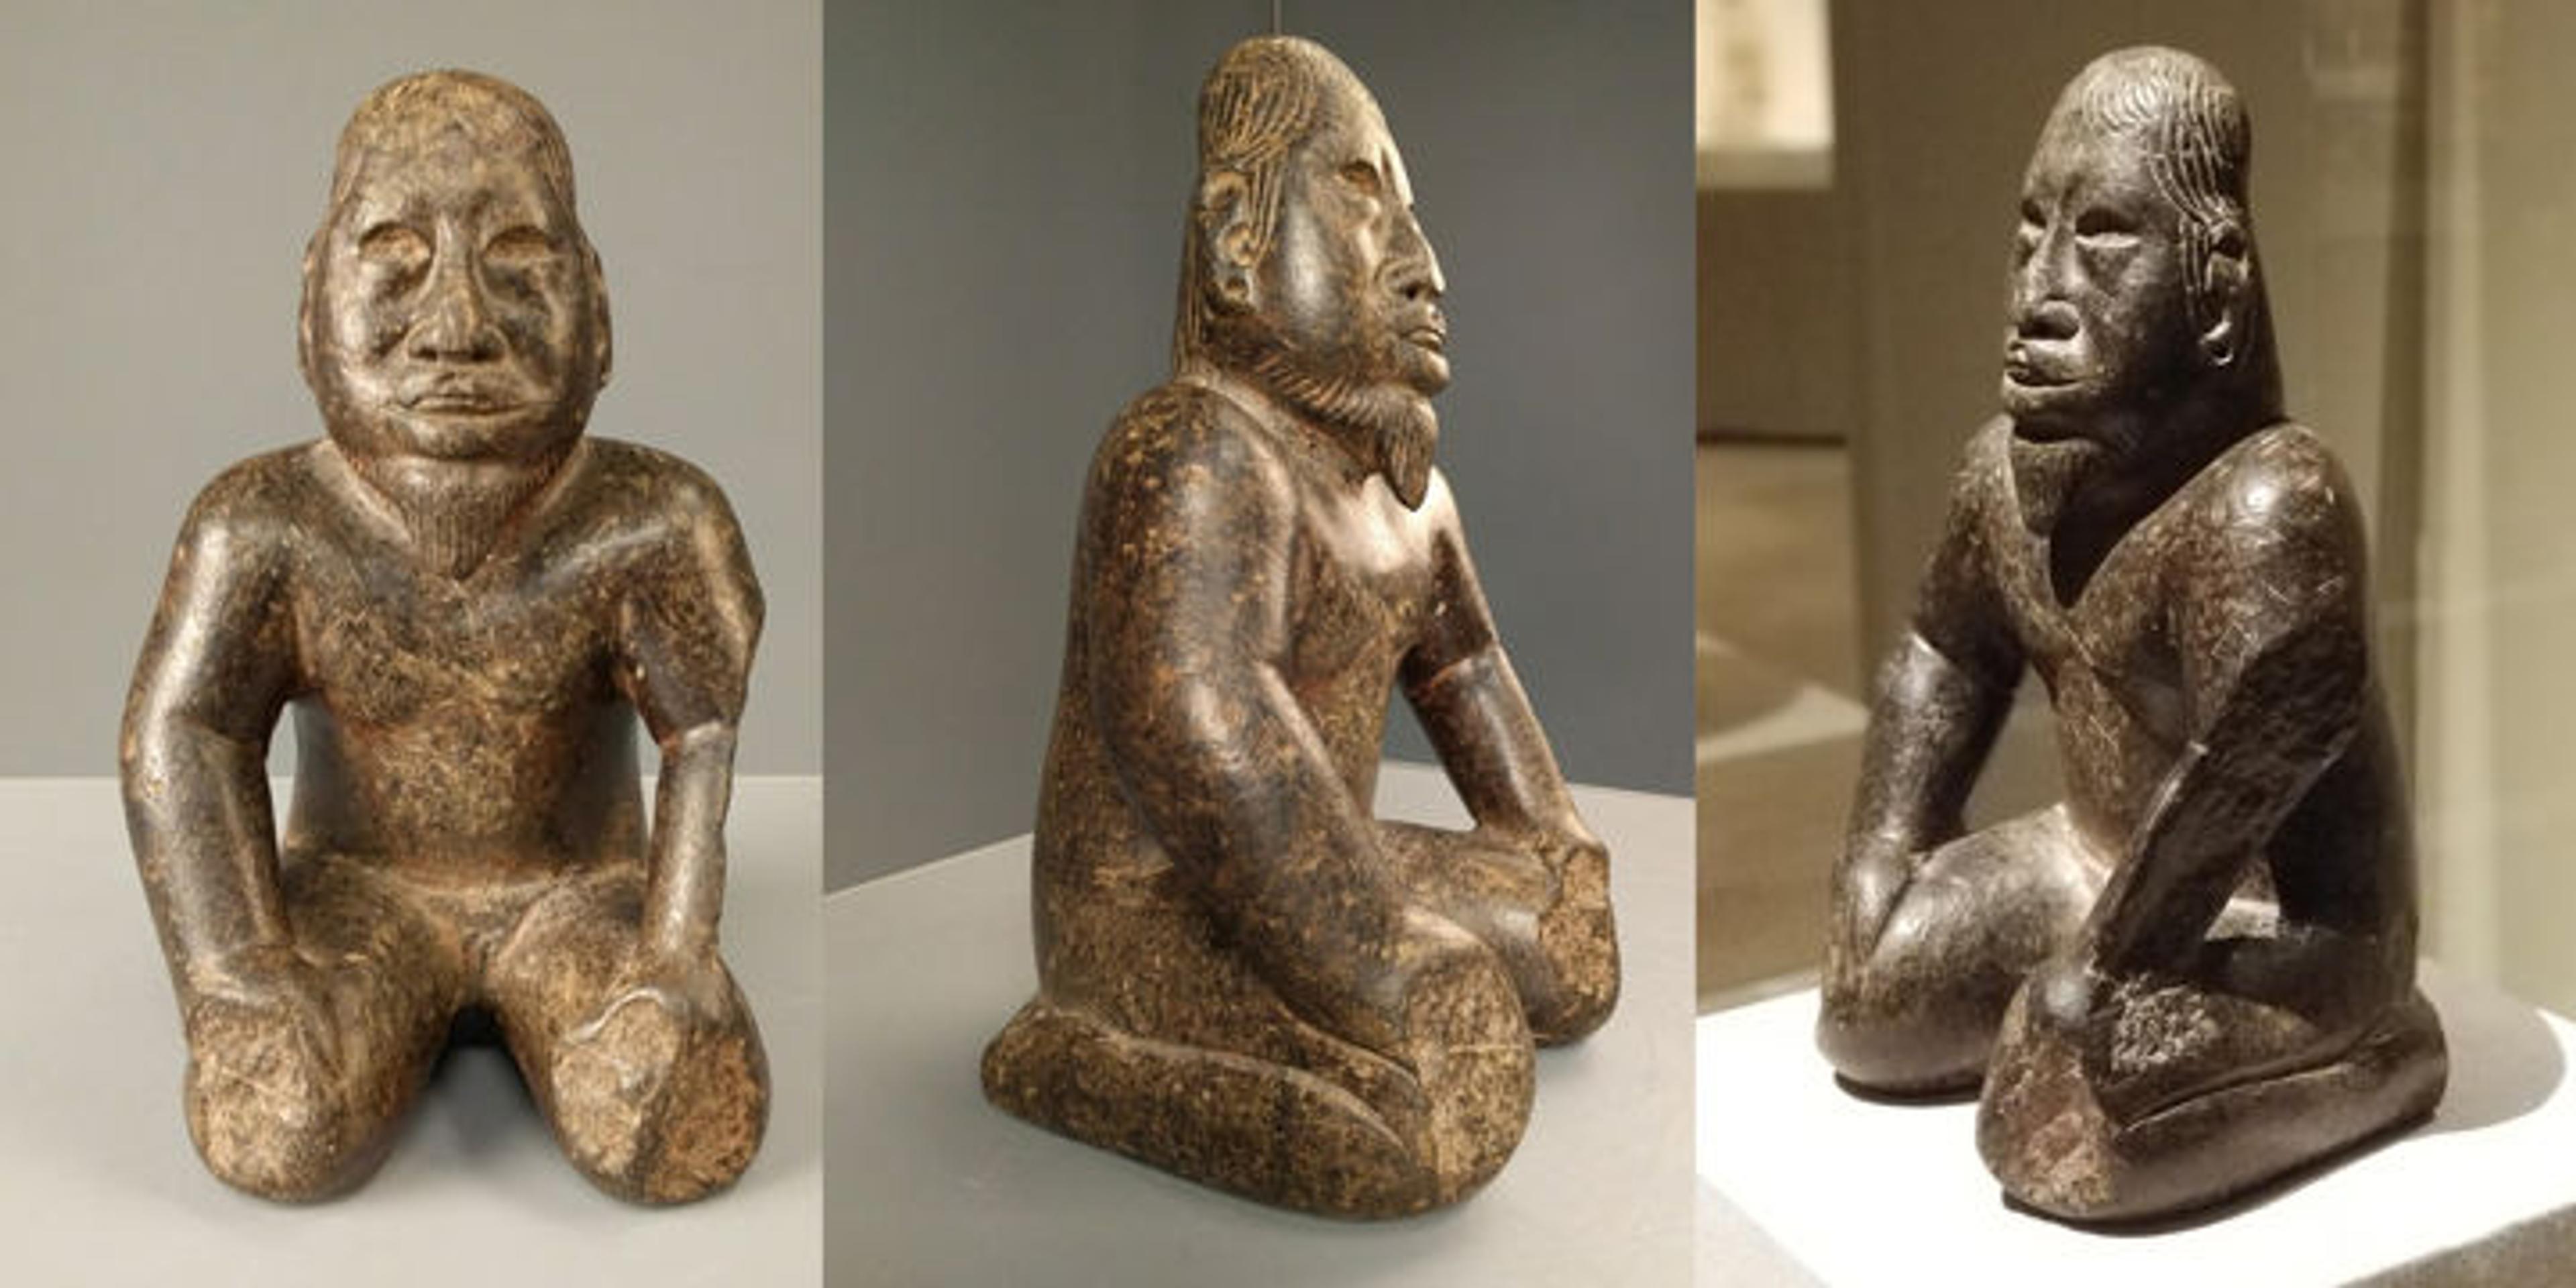 Three views of a Mexican kneeling bearded figure sculpture